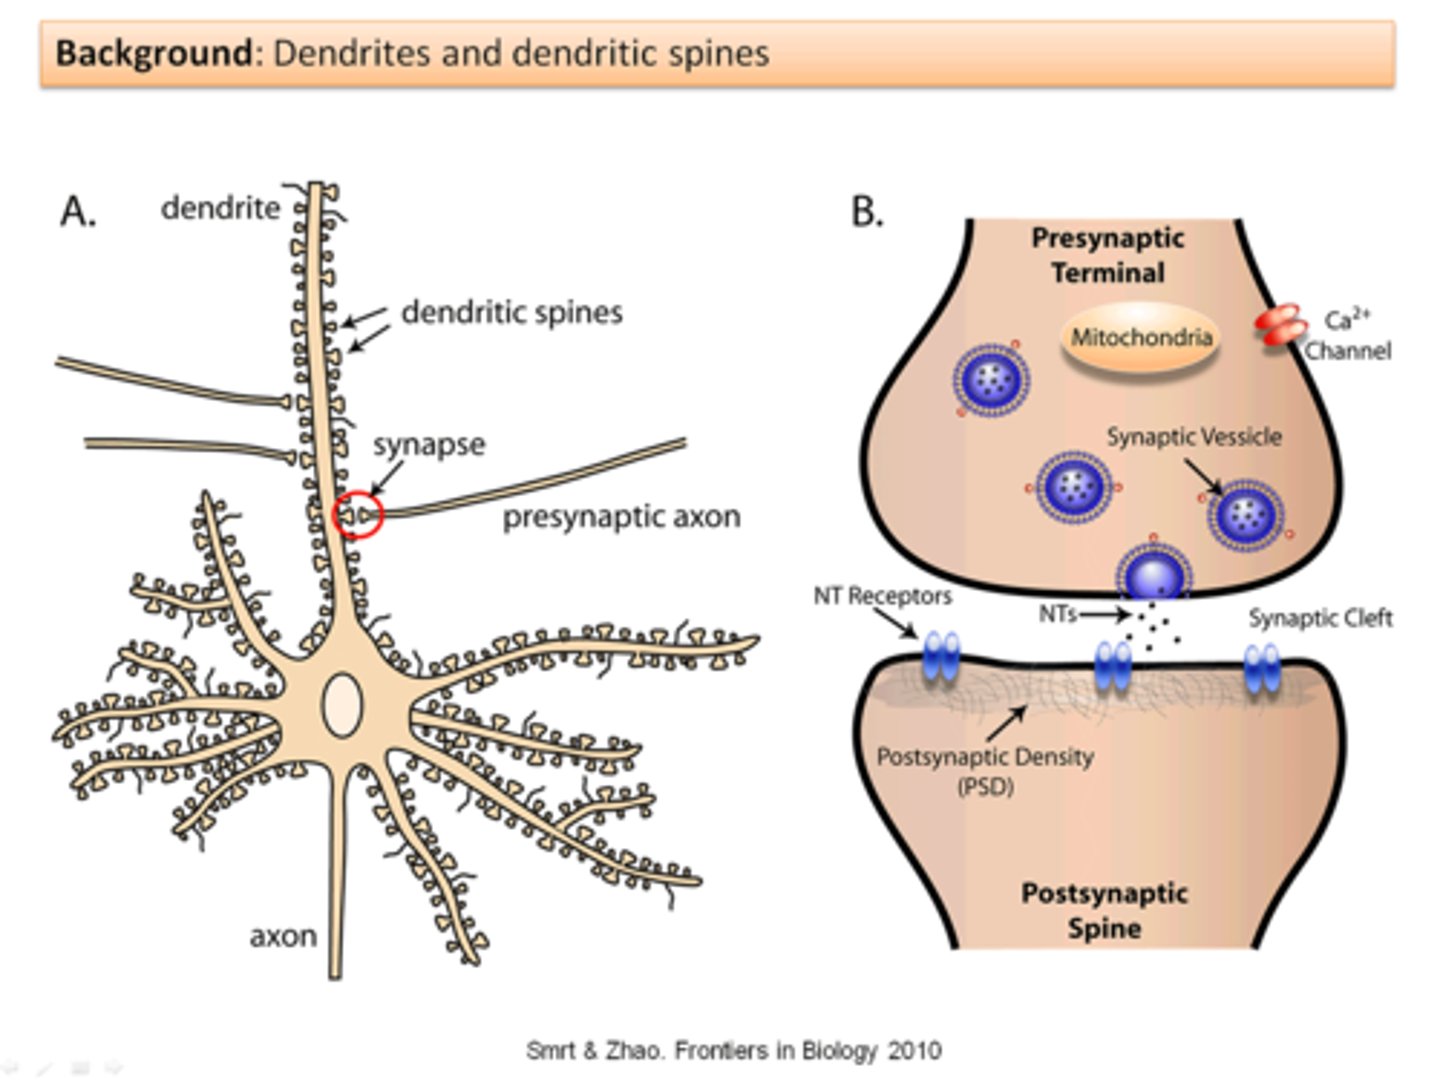 <p>Protrude from the main shaft of dendrite, single synapse at head. Modified by activity and experience (via actin). Morphological basis for synaptic plasticity</p>